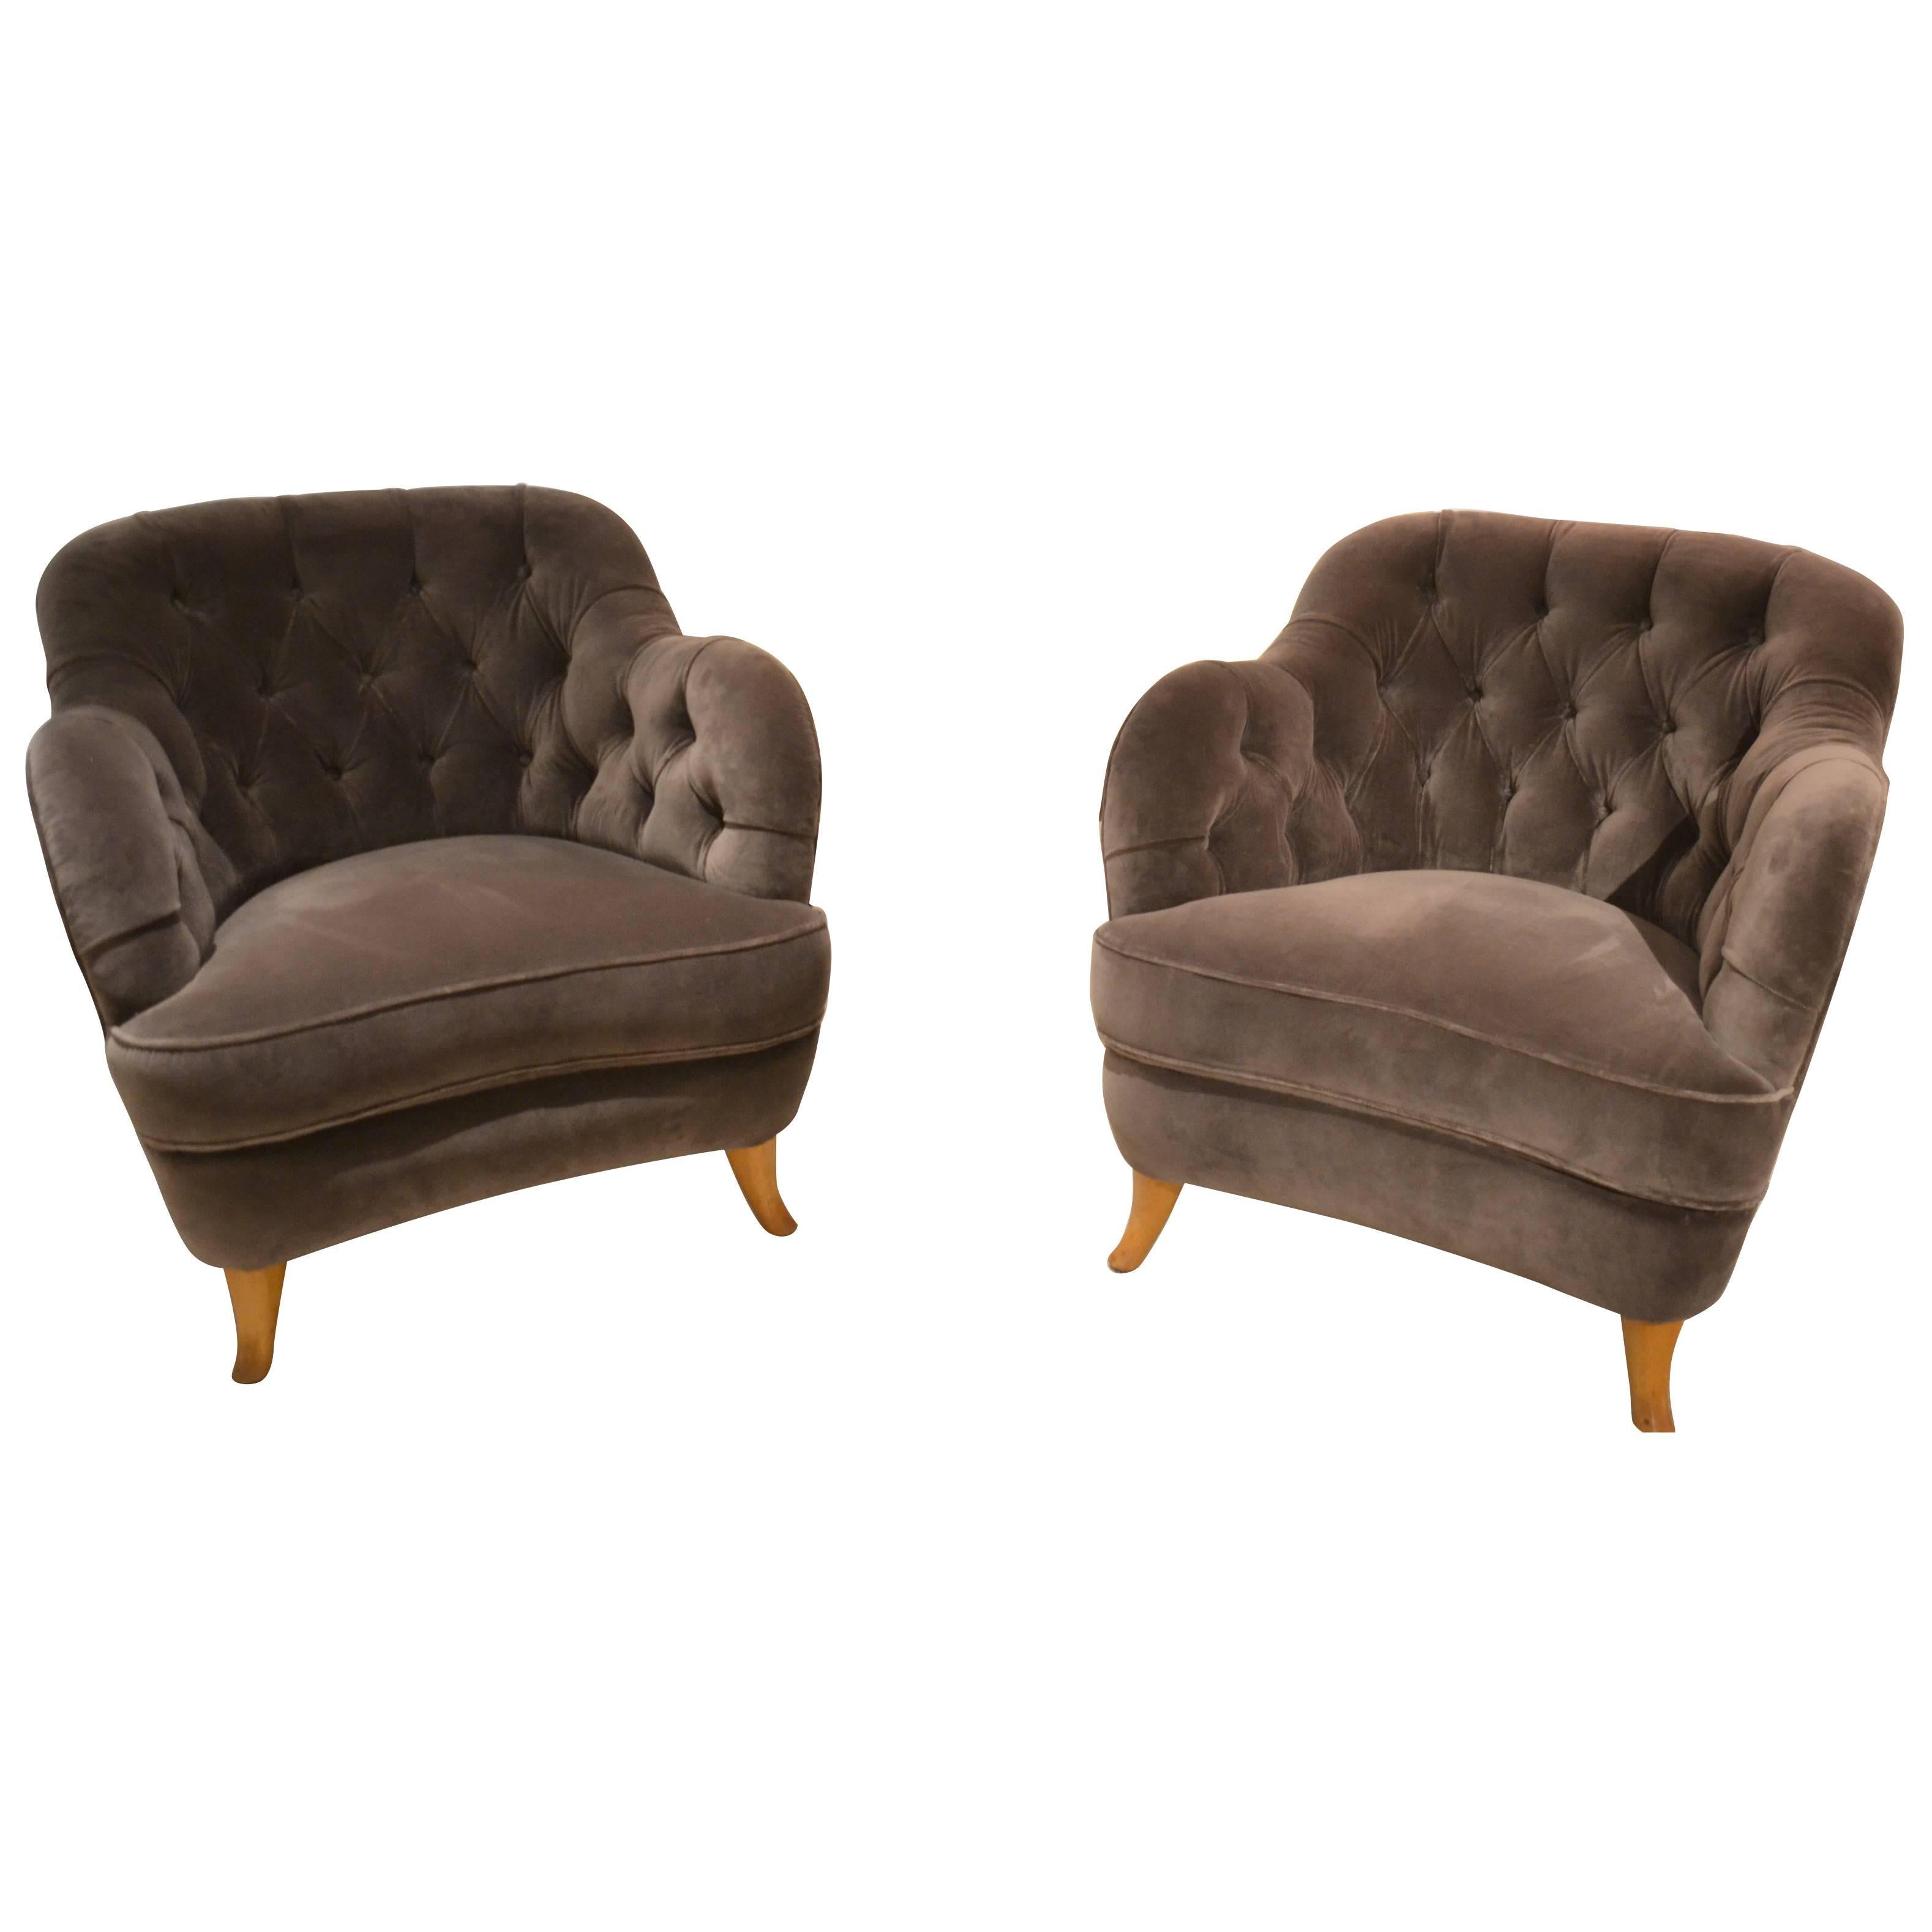 Pair of Rare and Early Lounge Chairs by Elias Svedberg, Sweden, circa 1940